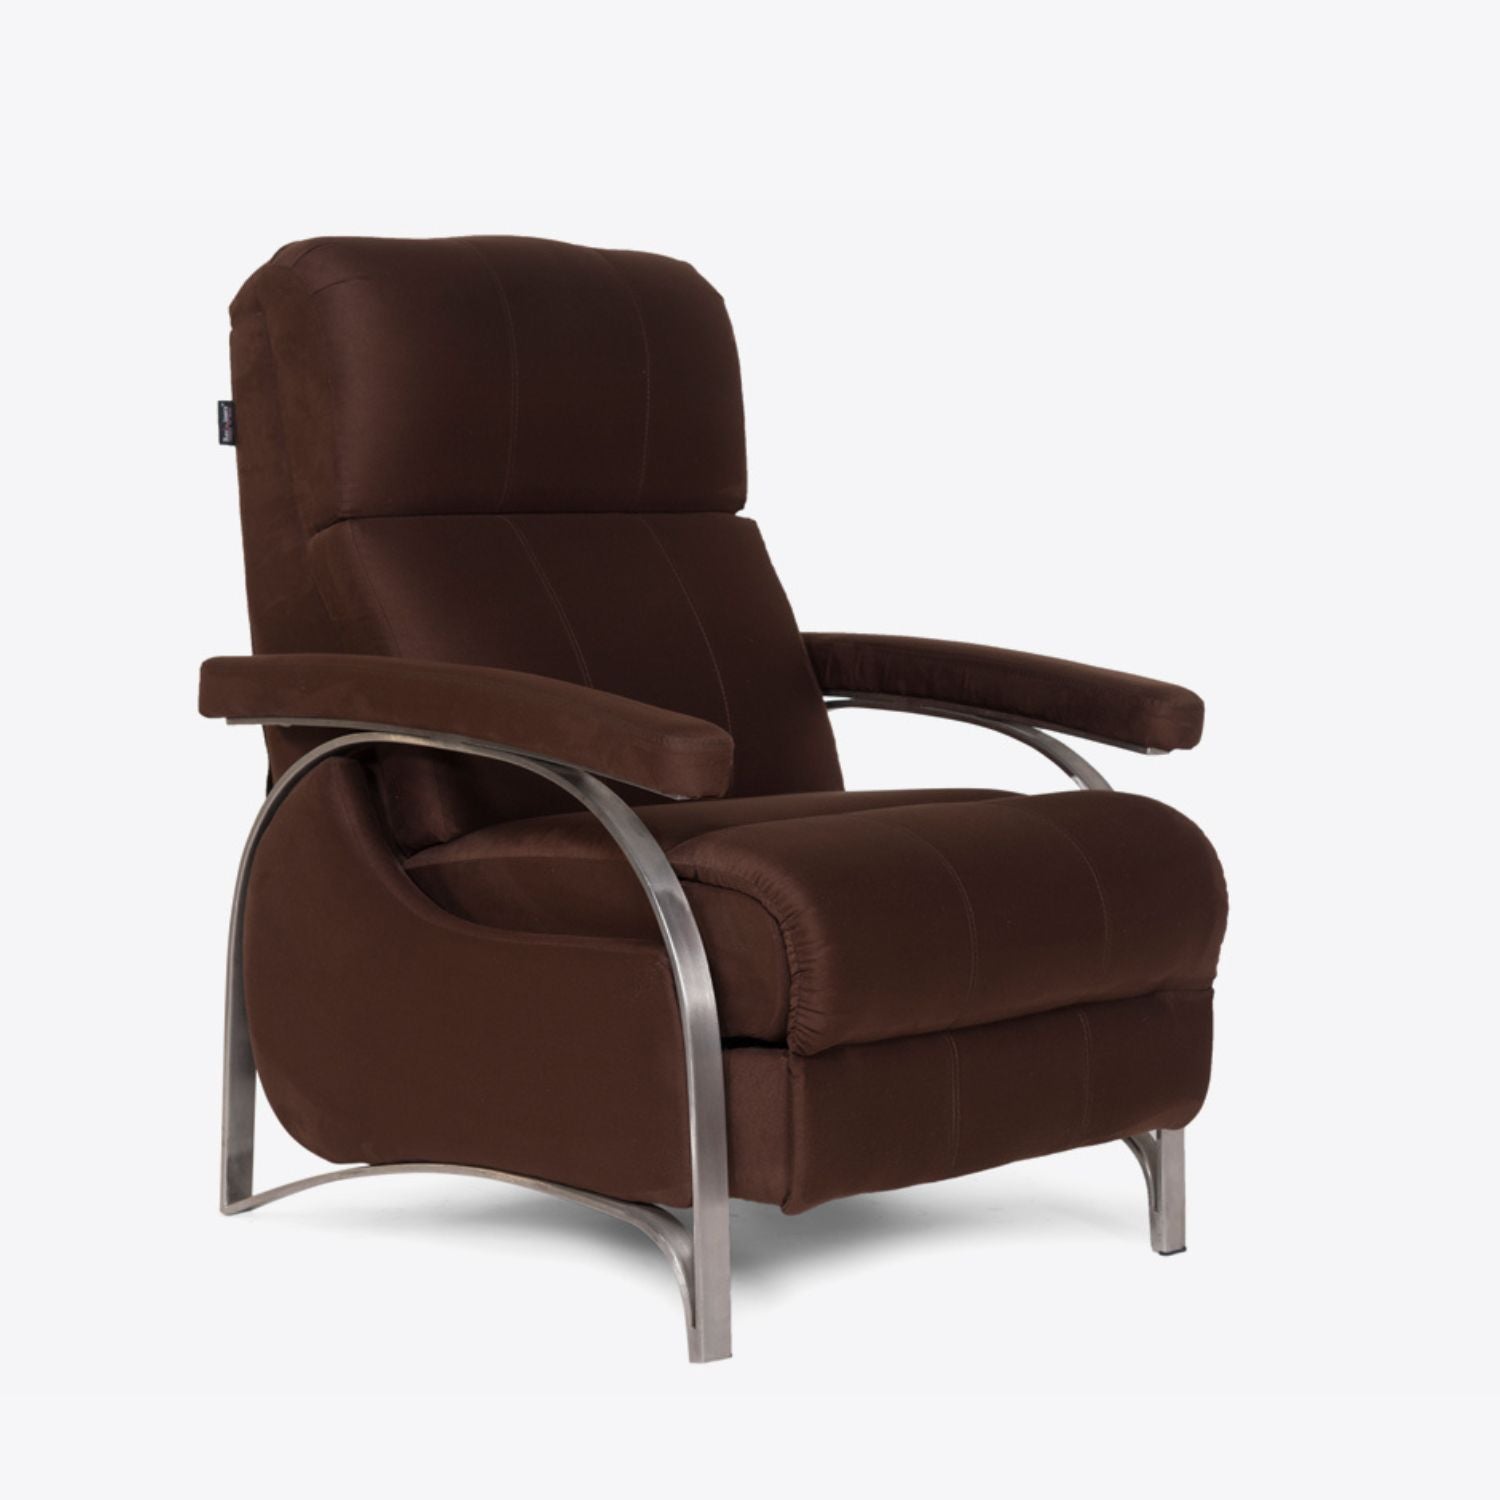 645 Recliner Chair Recliners India